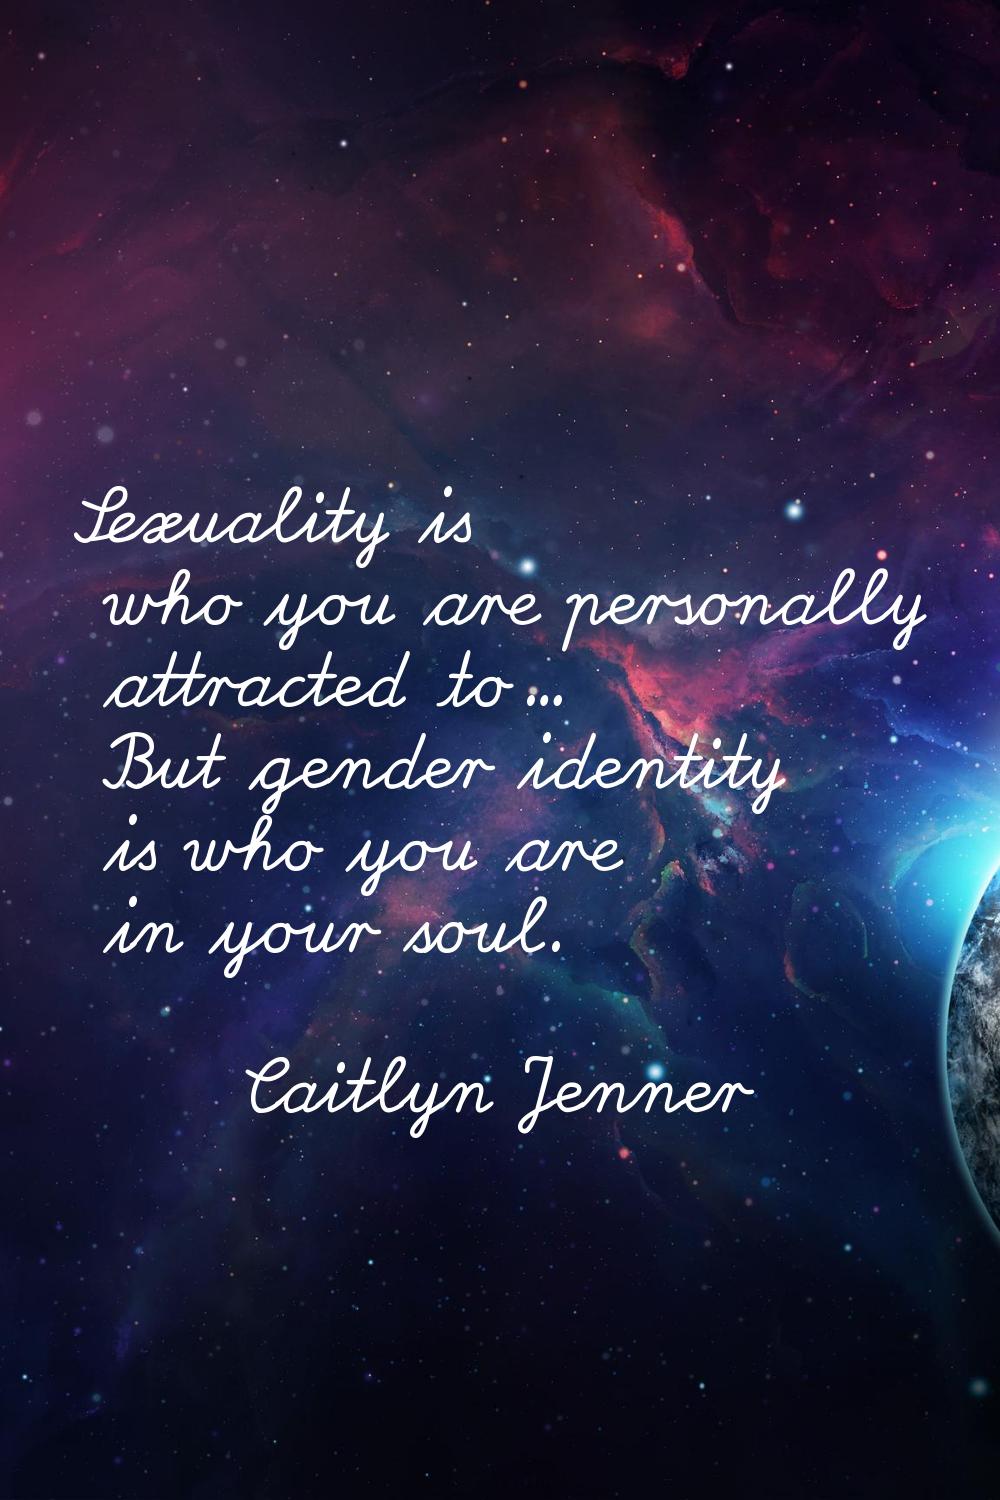 Sexuality is who you are personally attracted to... But gender identity is who you are in your soul